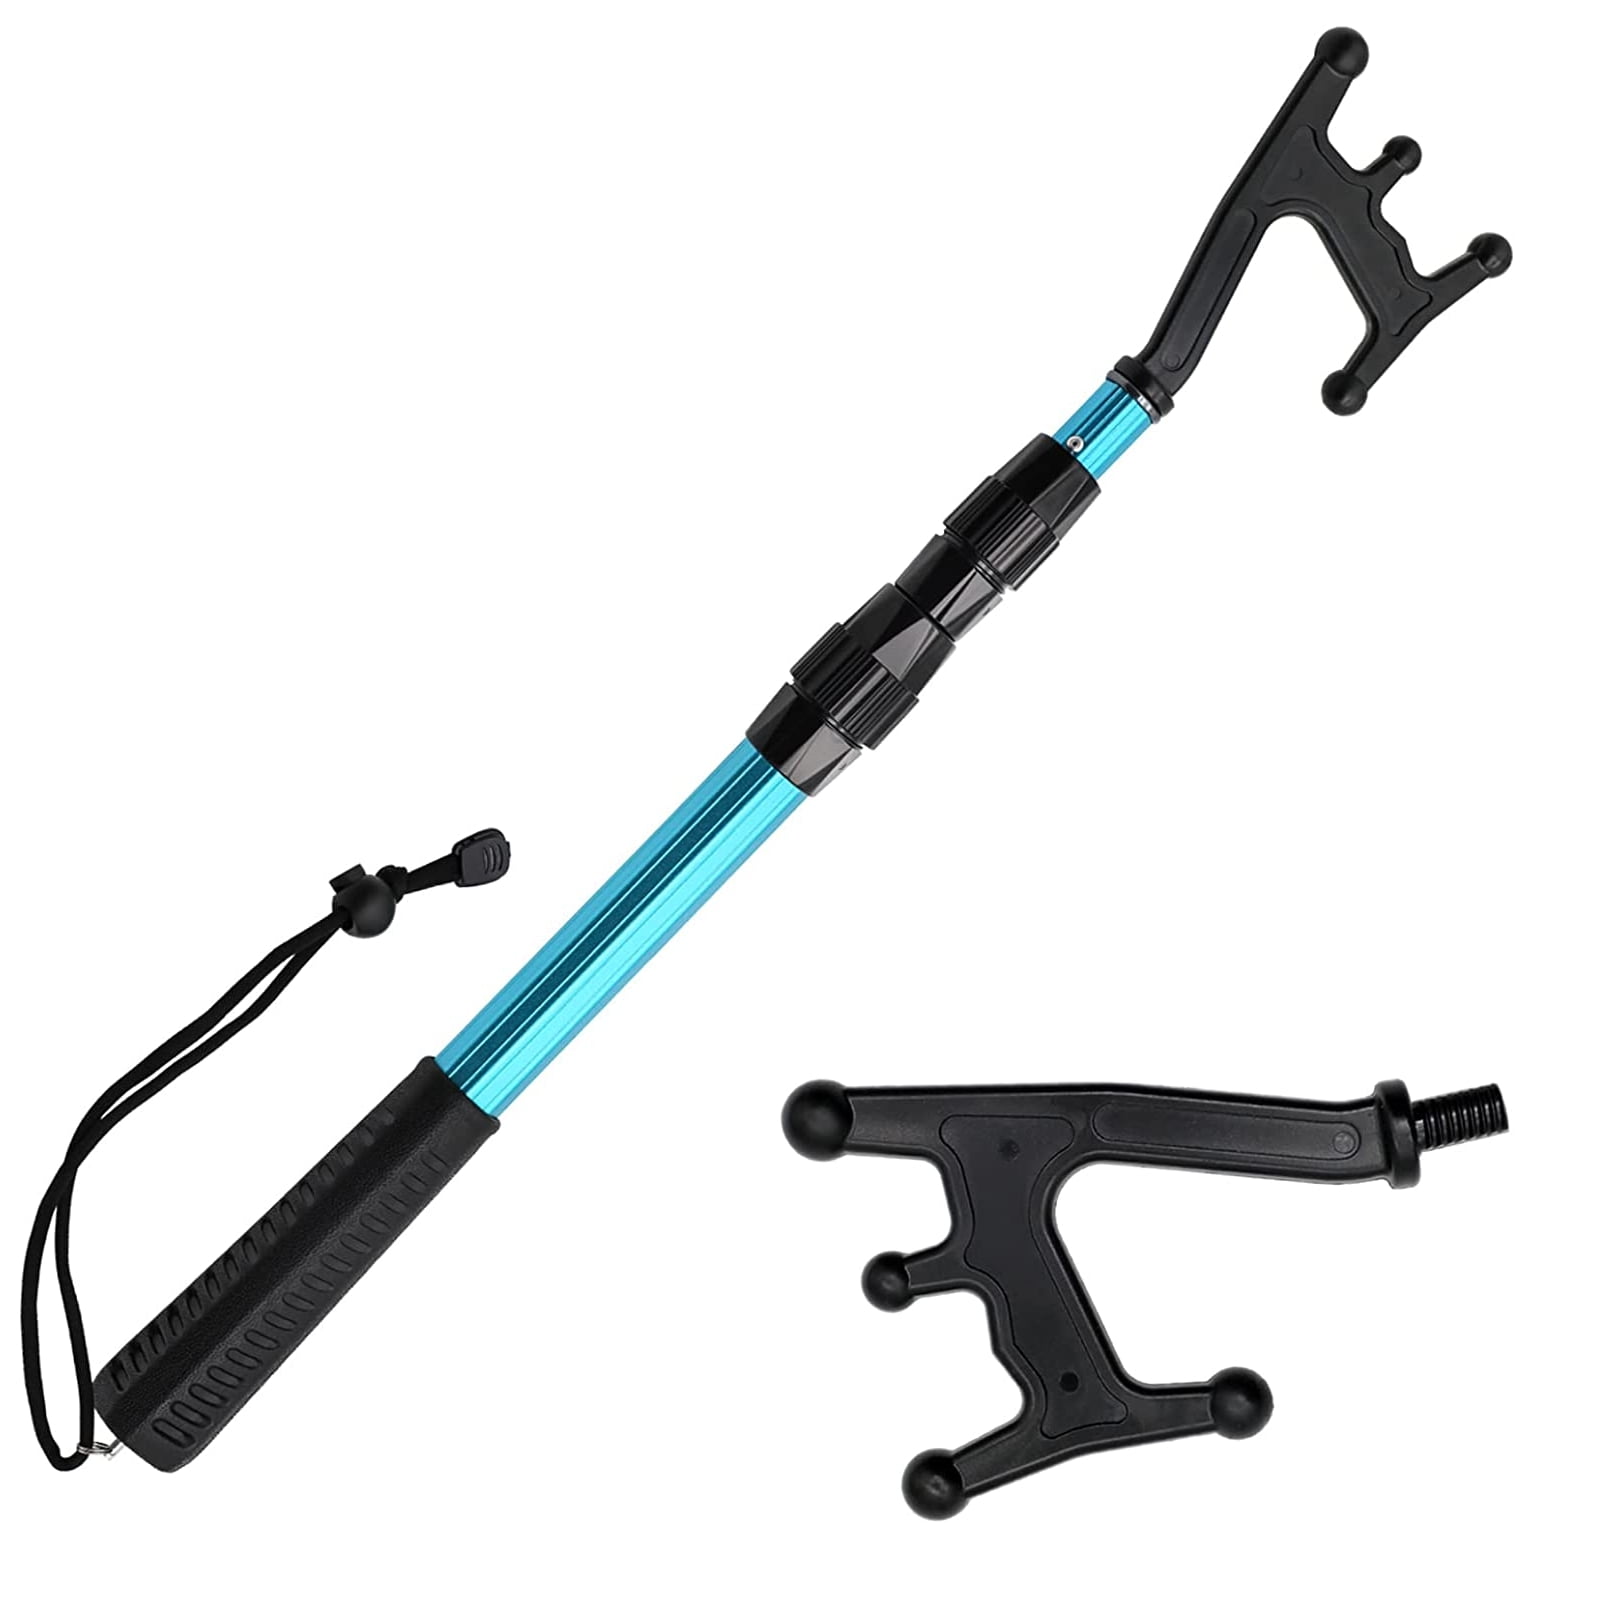 SAN LIKE Boat Hook Telescopic Boat Hook Extendable Push Pole for Docking  Aluminum &Lightweight with Floating Hand Grips for Docking Extend to